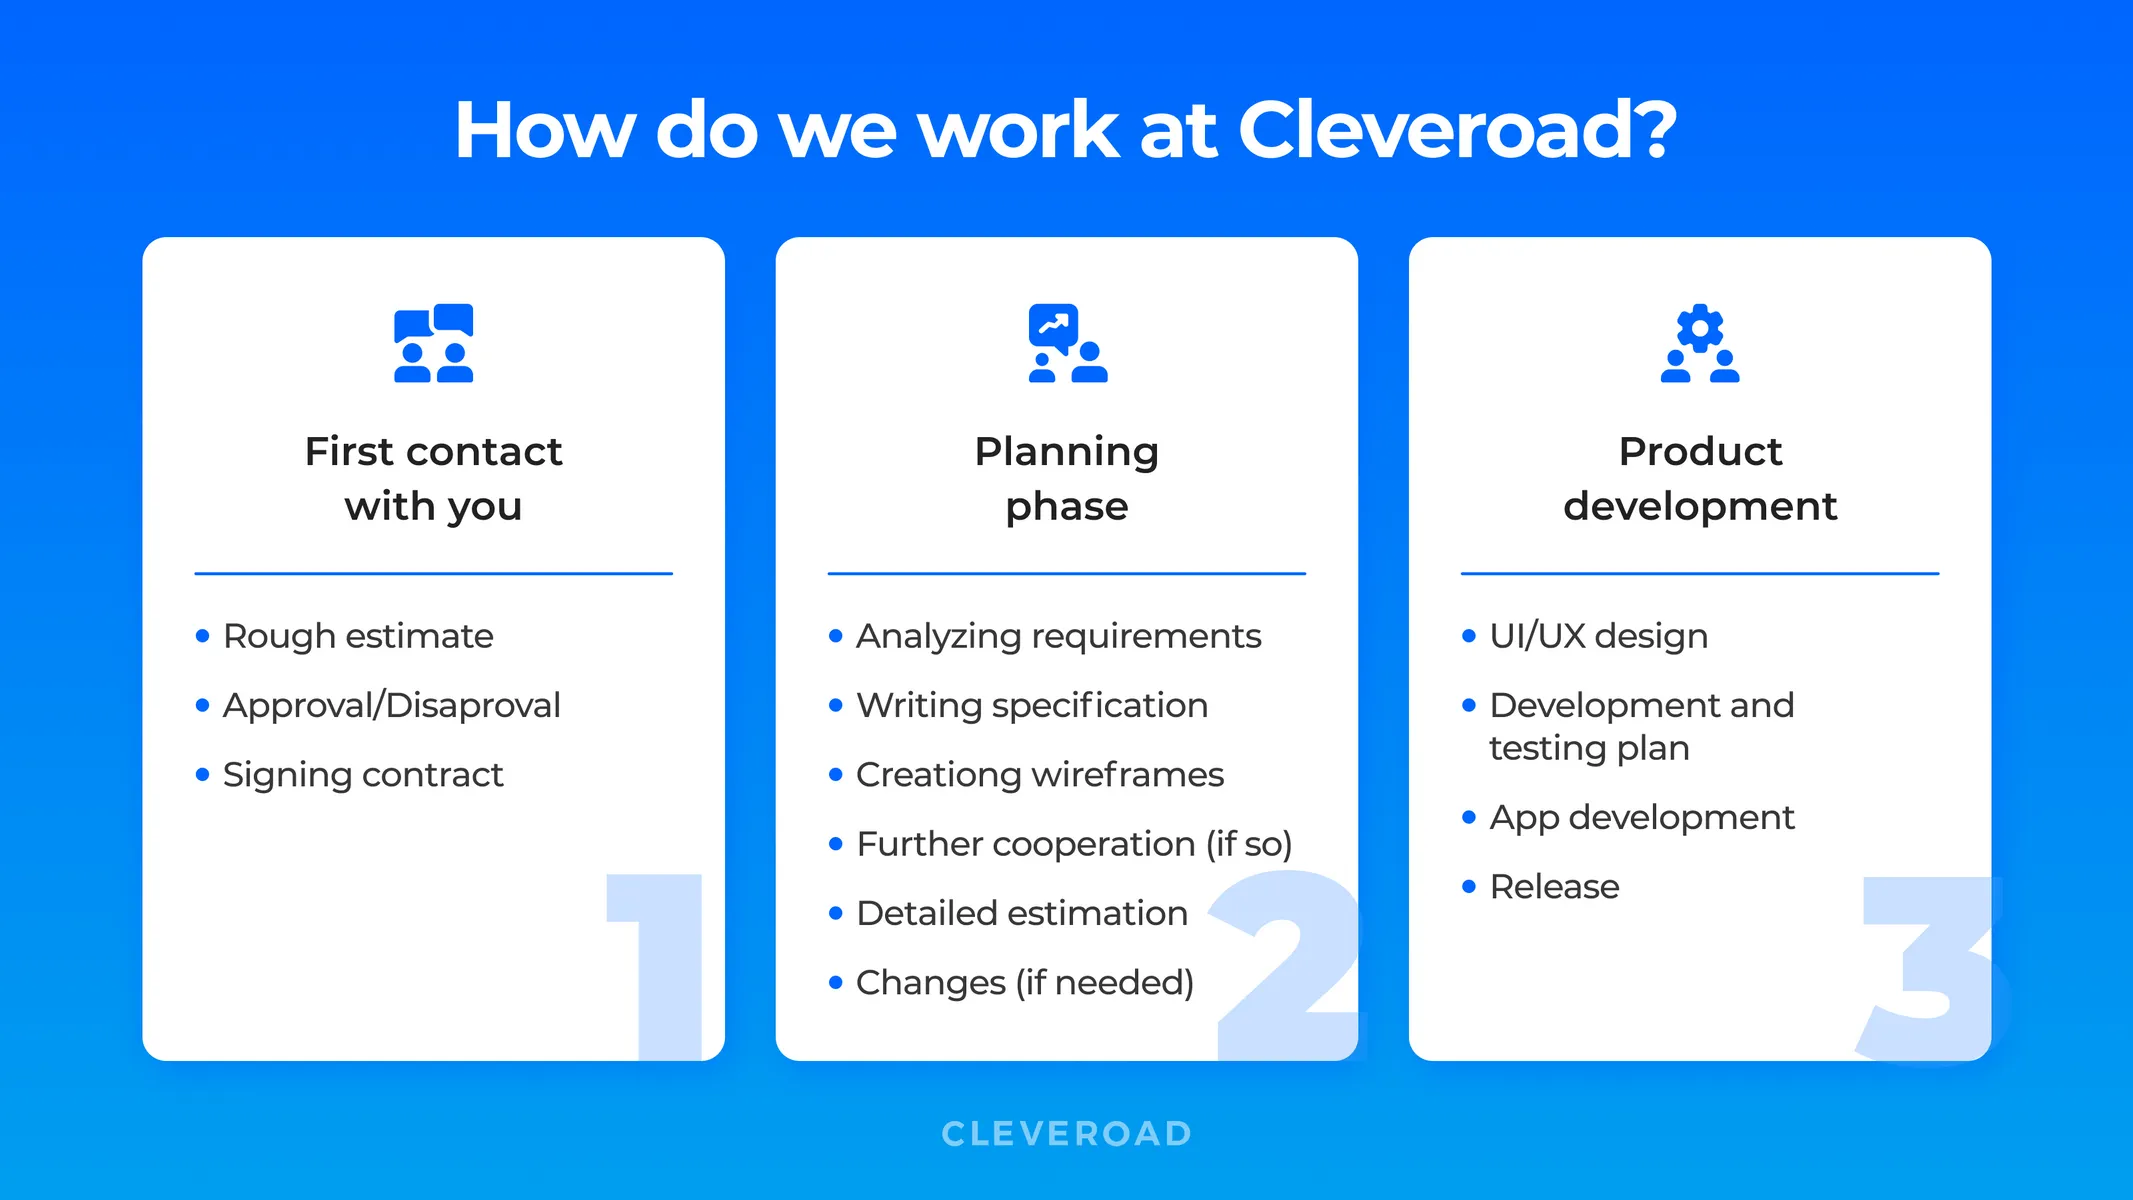 How do we work at Cleveroad